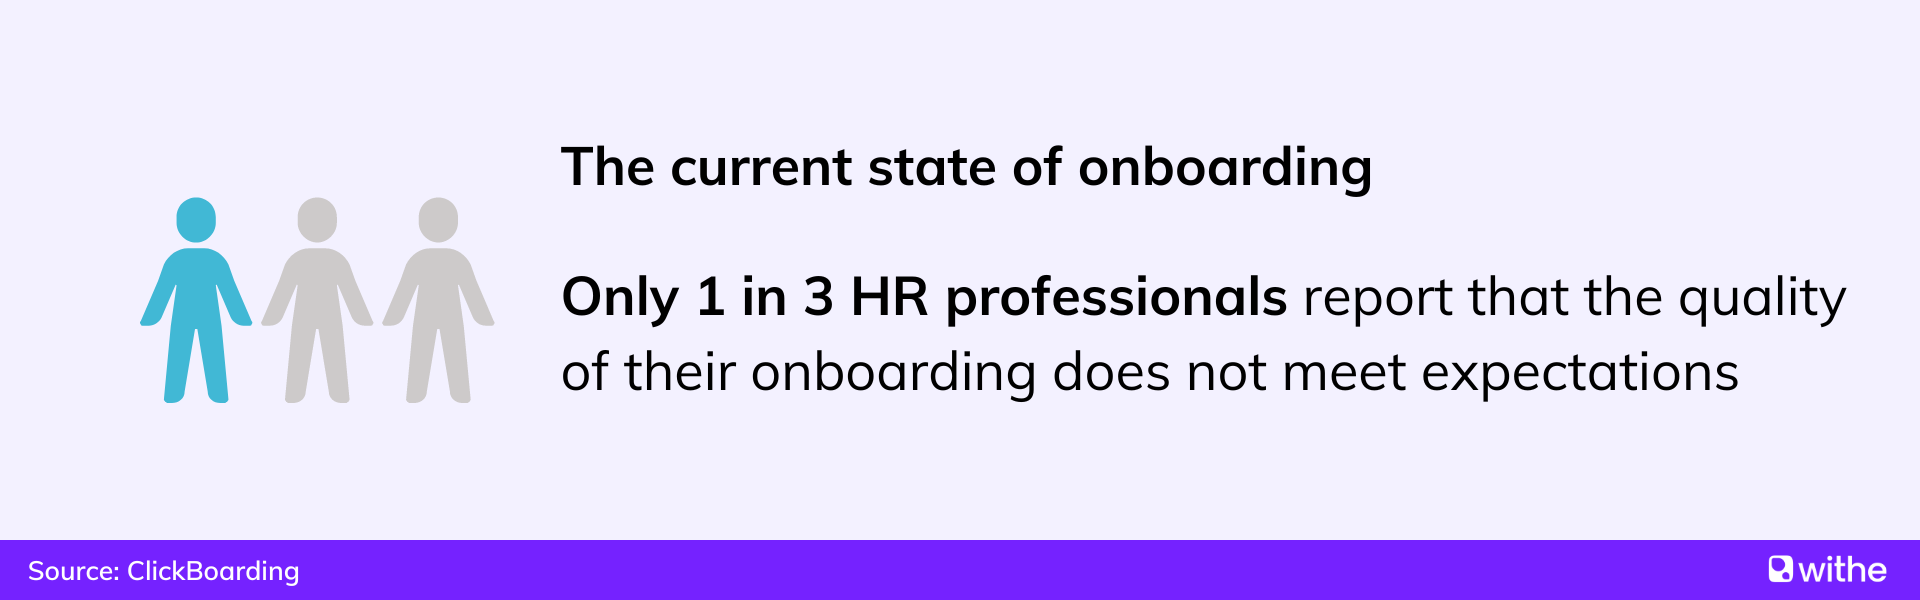 Employee onboarding statistics - the current state of onboarding